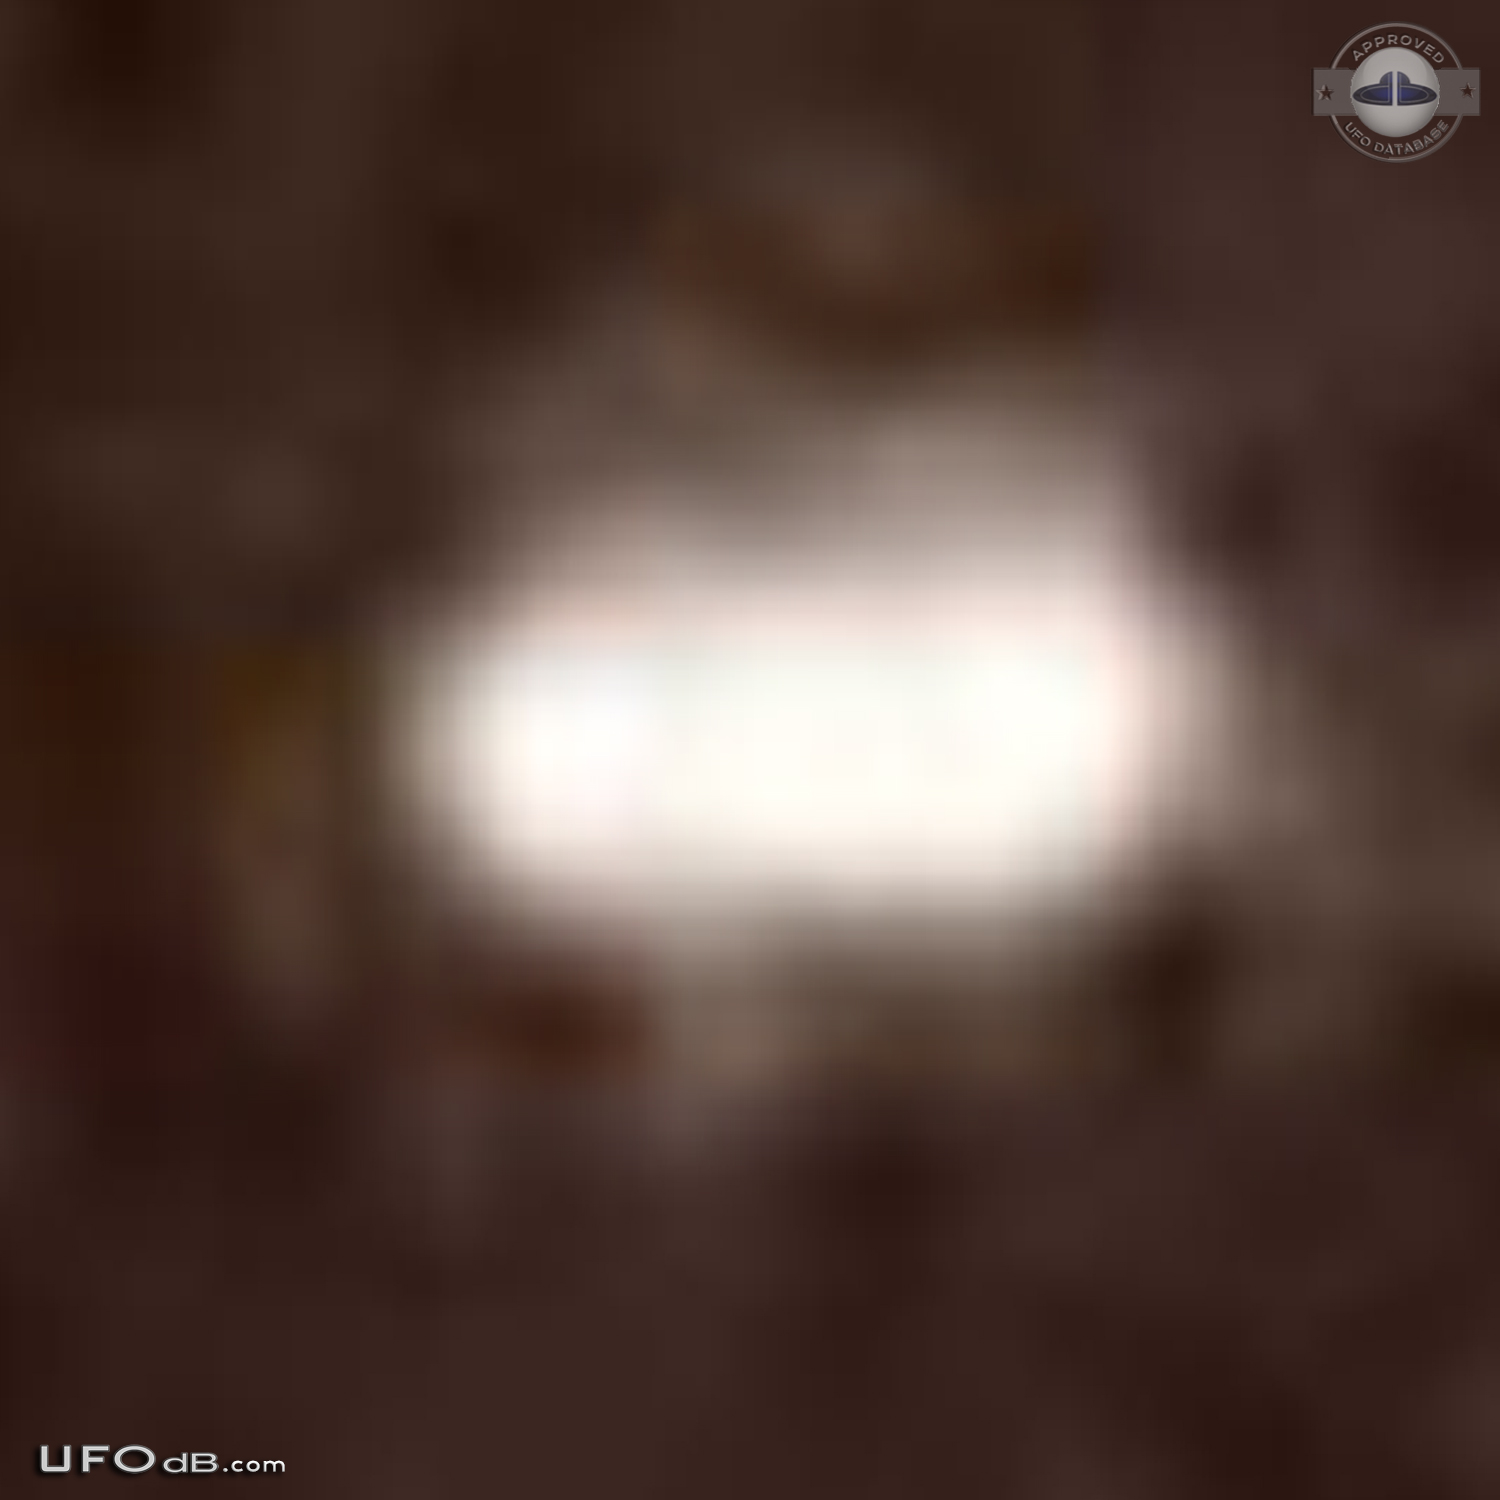 Sphere UFOs appear beside Fireworks during Diwali in New Delhi - 2011 UFO Picture #475-7